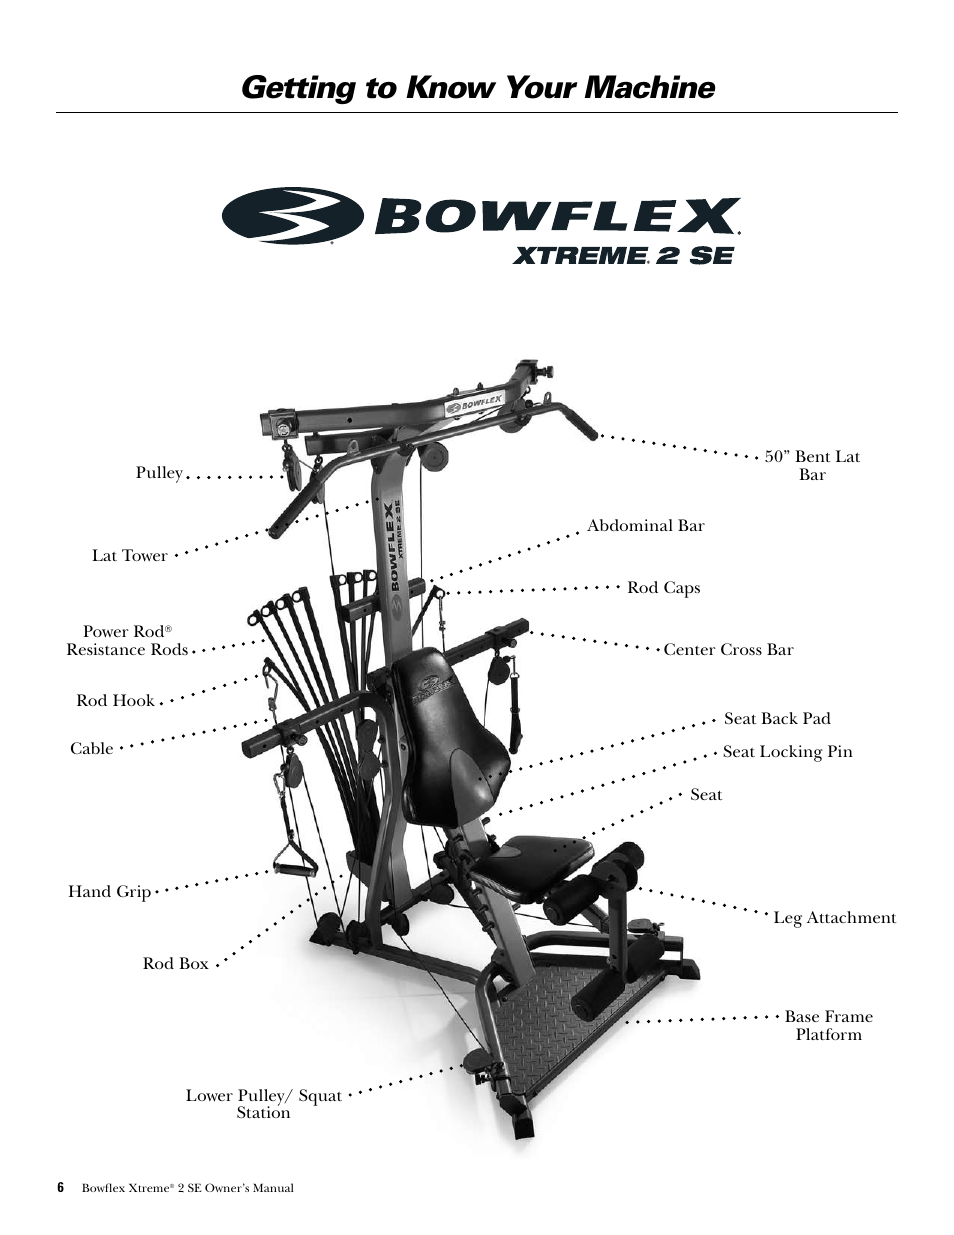 Getting to know your machine | Bowflex Xtreme 2 SE User Manual | Page 8